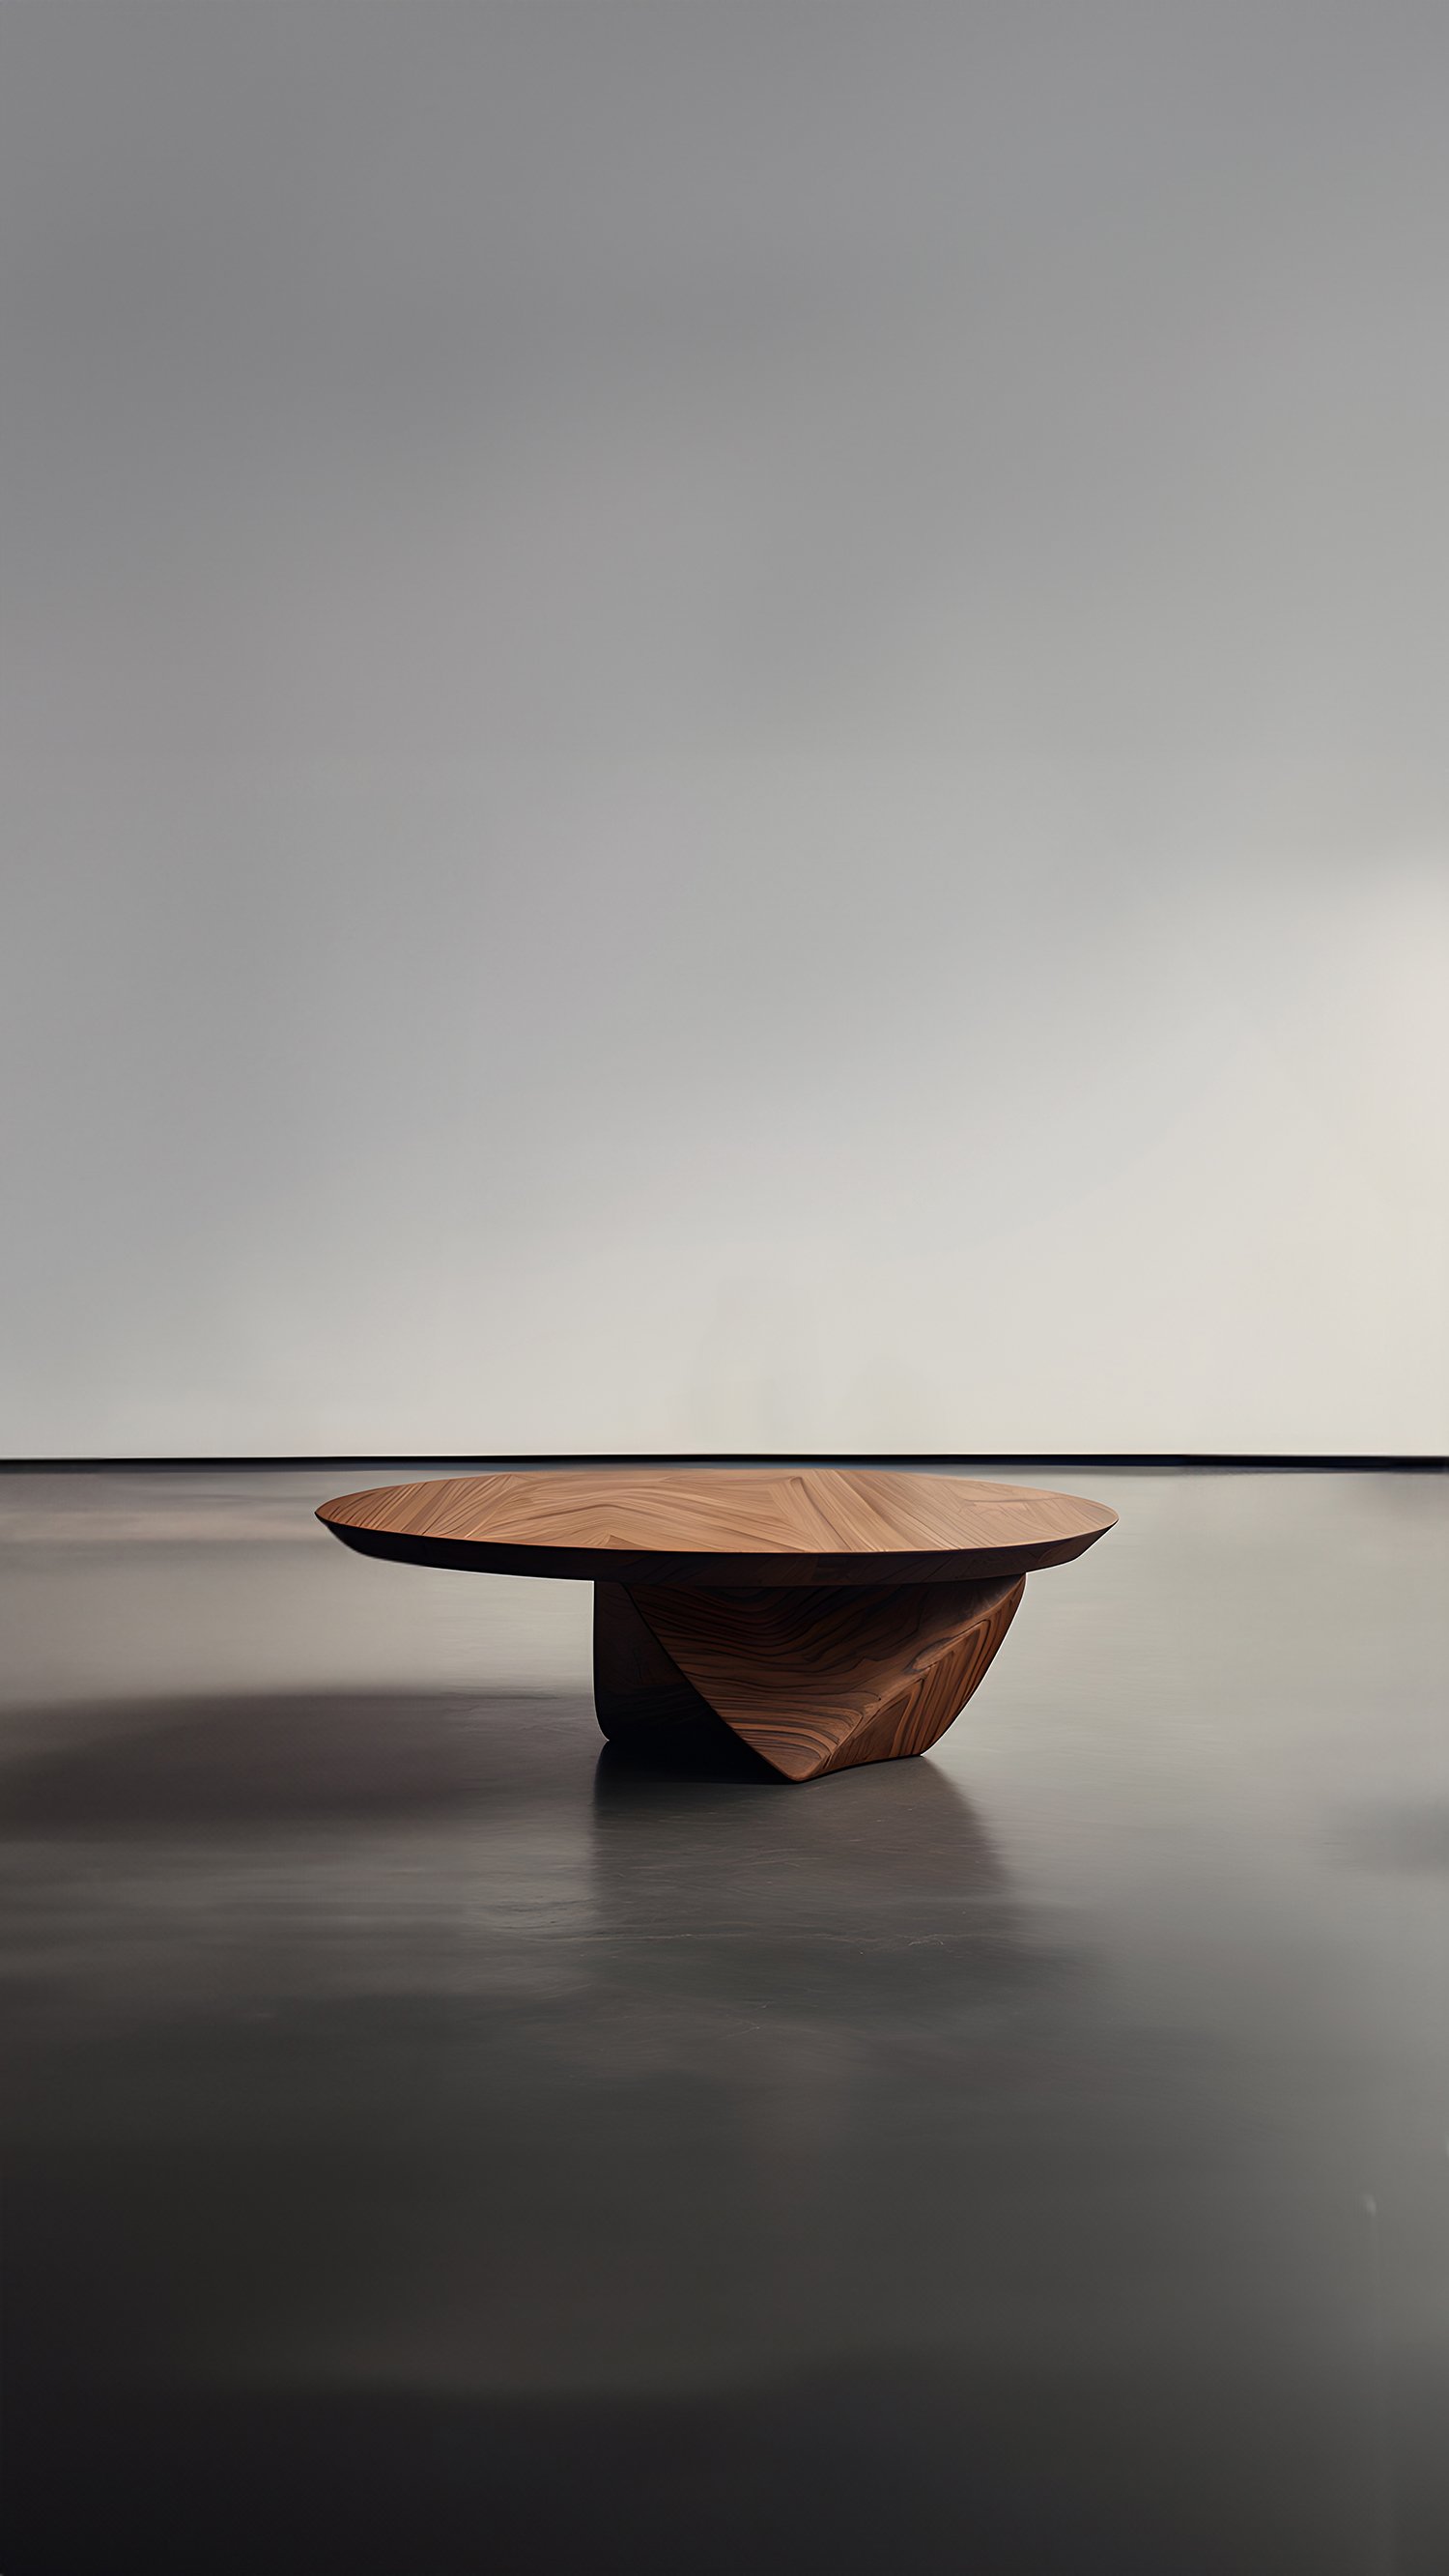 Sculptural Coffee Table Made of Solid Wood, Center Table Solace S32 by Joel Escalona — 8.jpg